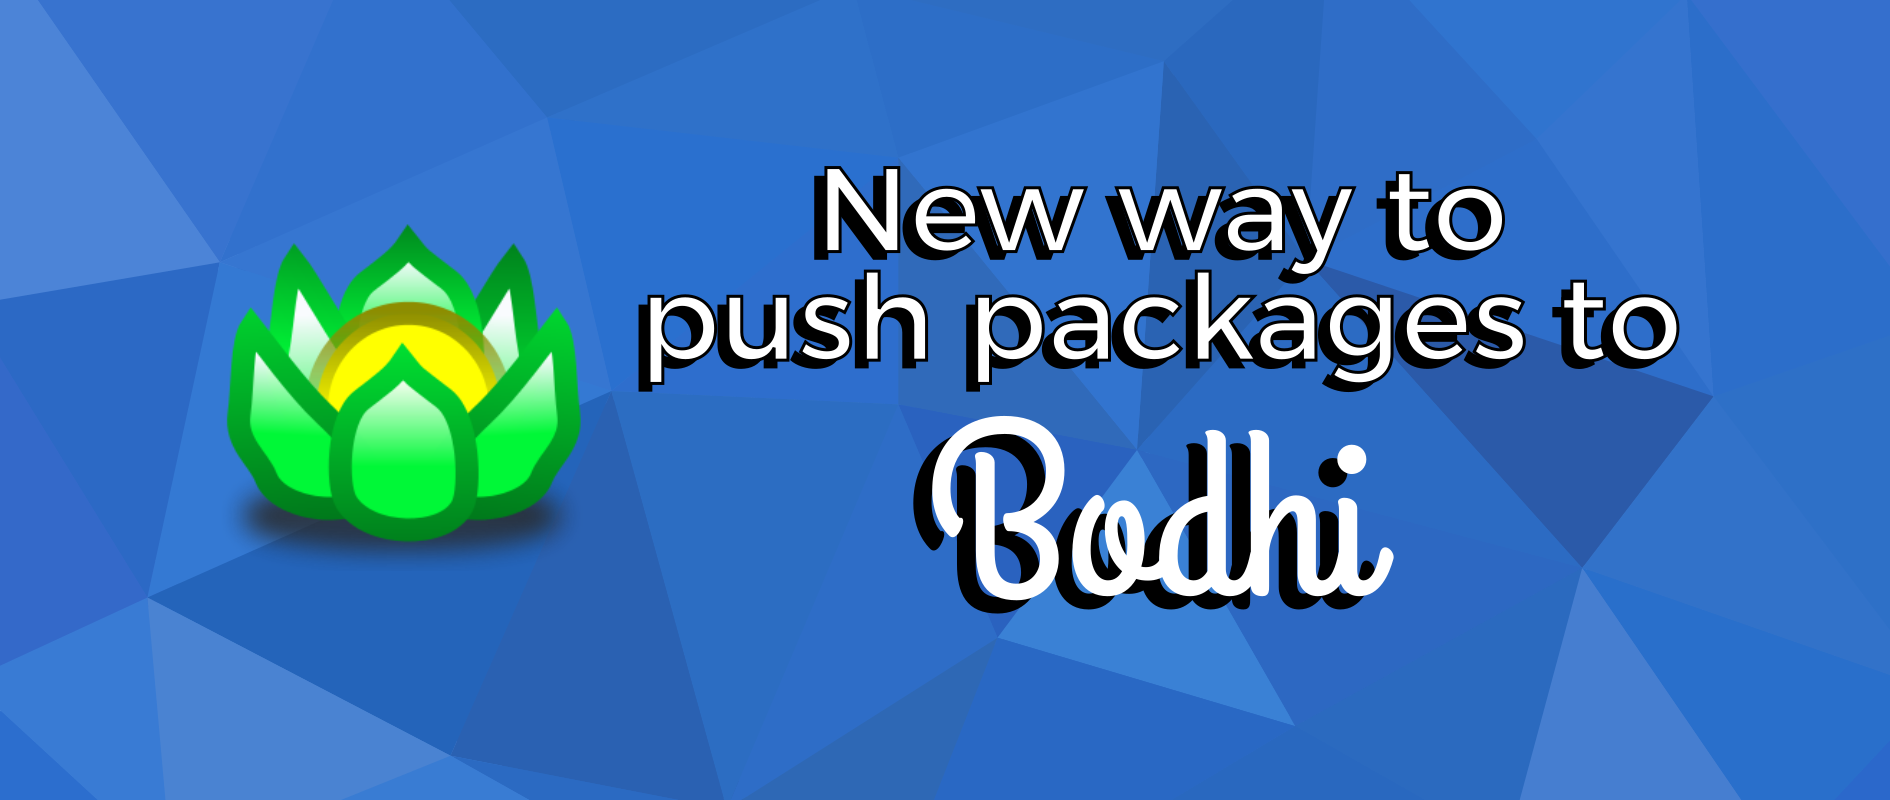 Another way to push package updates to stable in Fedora Bodhi